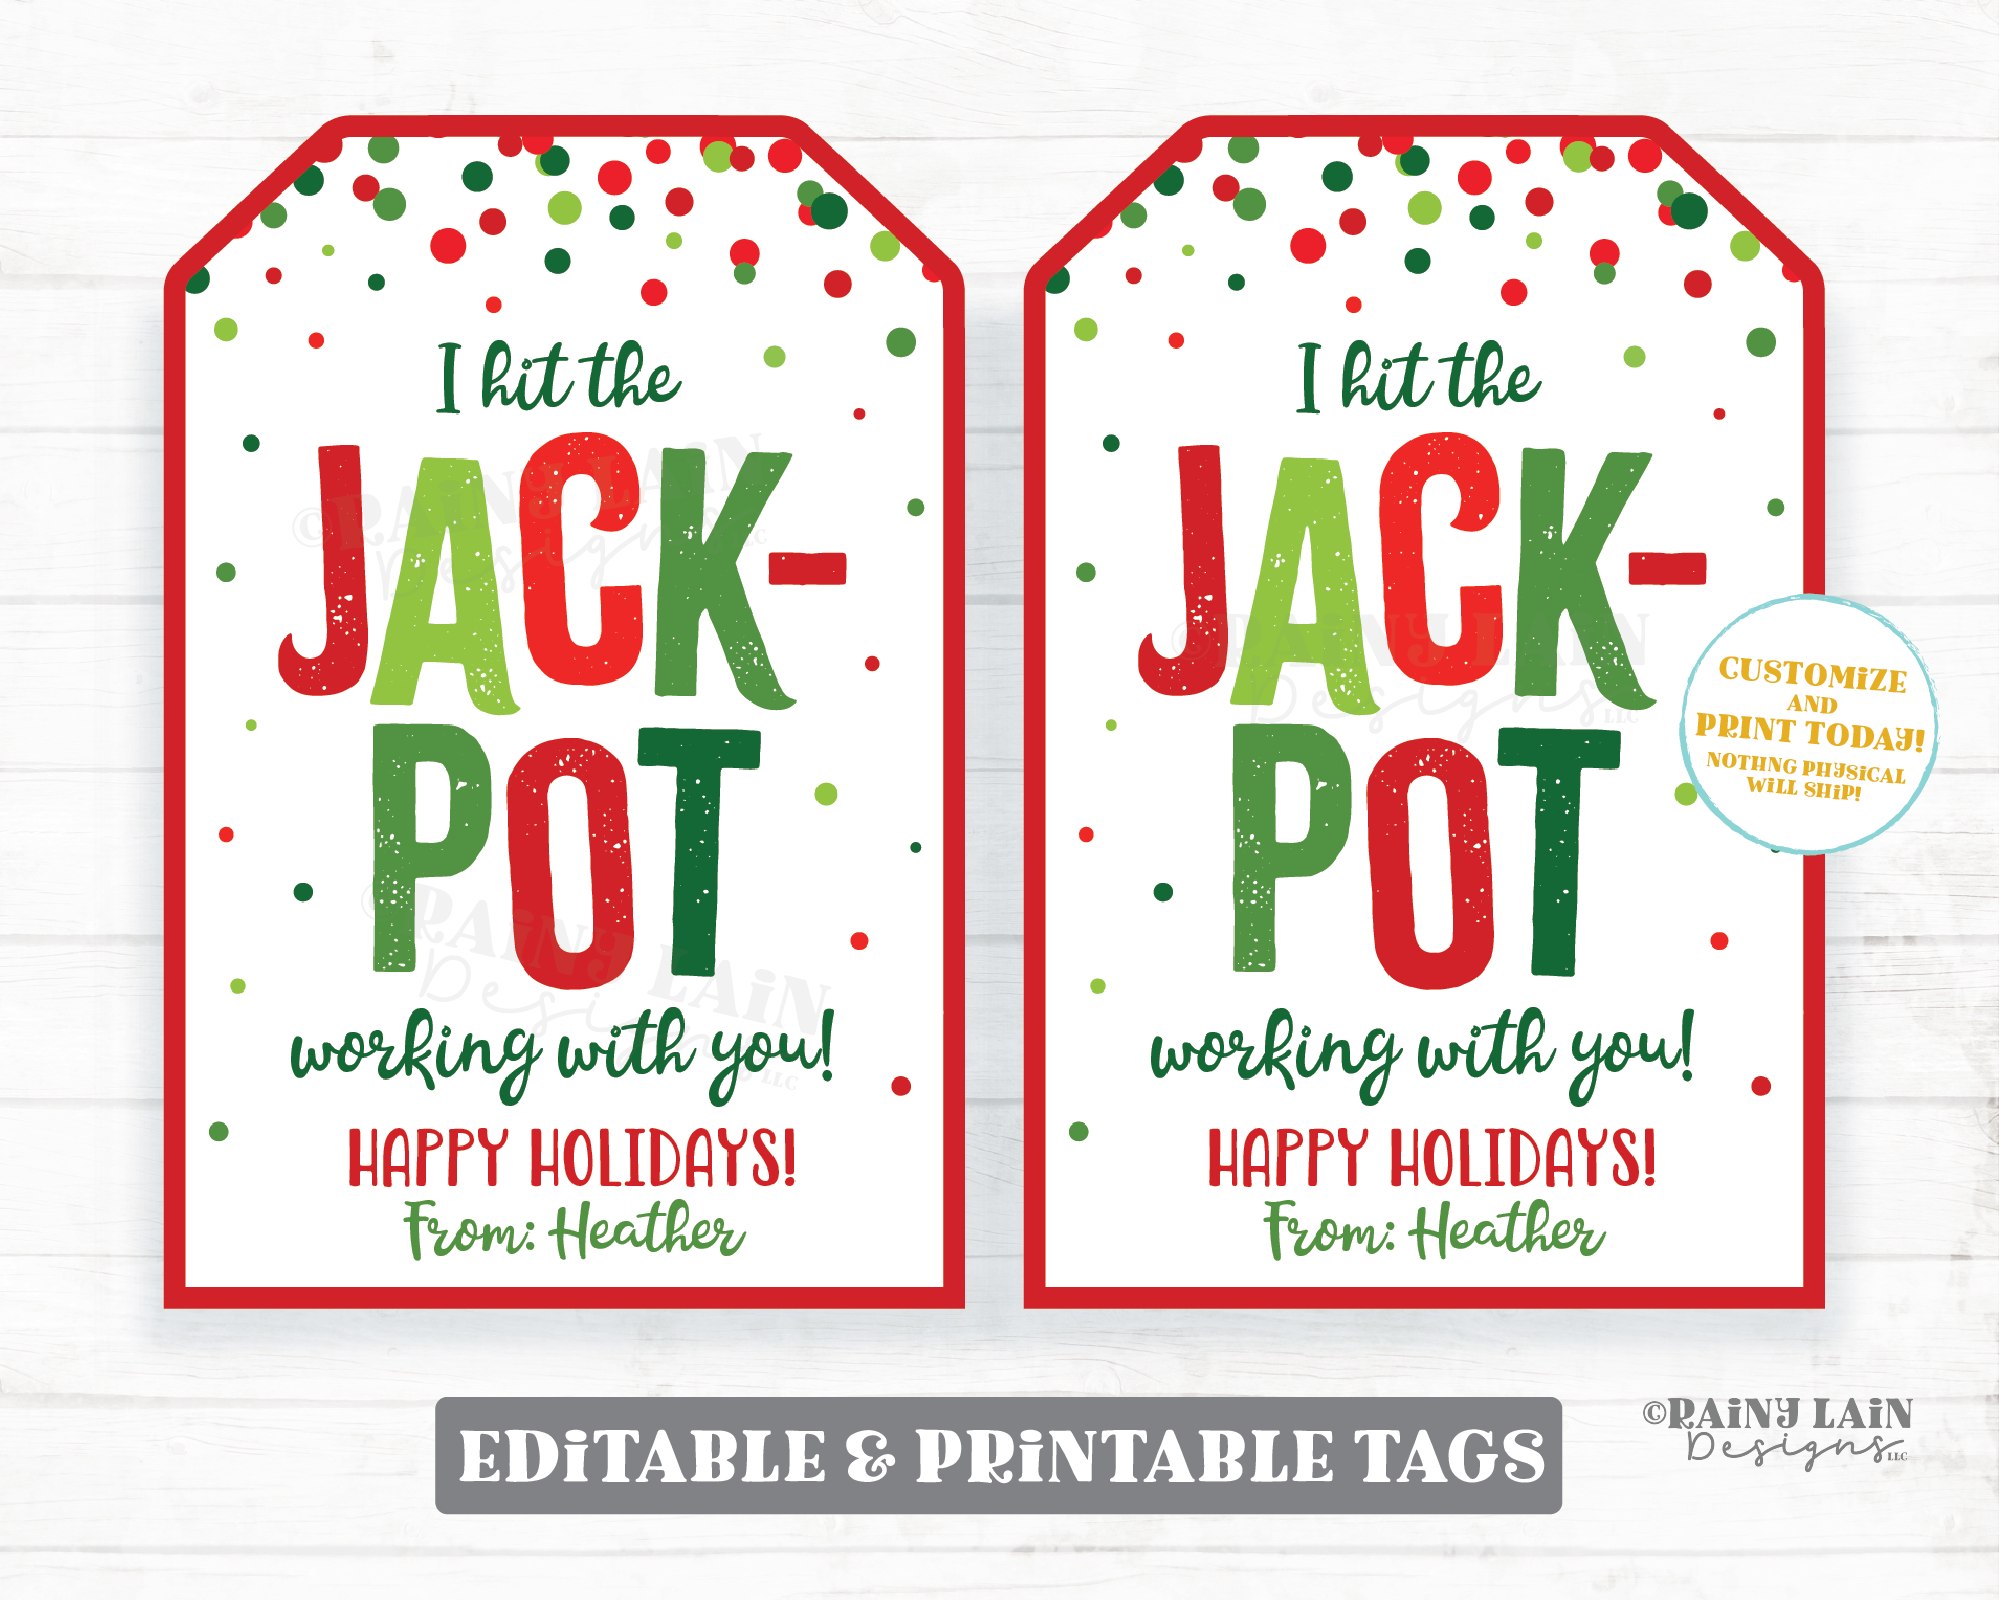 Hit the Jackpot Working With You Happy Holidays Tag Christmas Lottery Ticket Lotto Co-Worker Teacher Staff Employee PTO Gift Idea